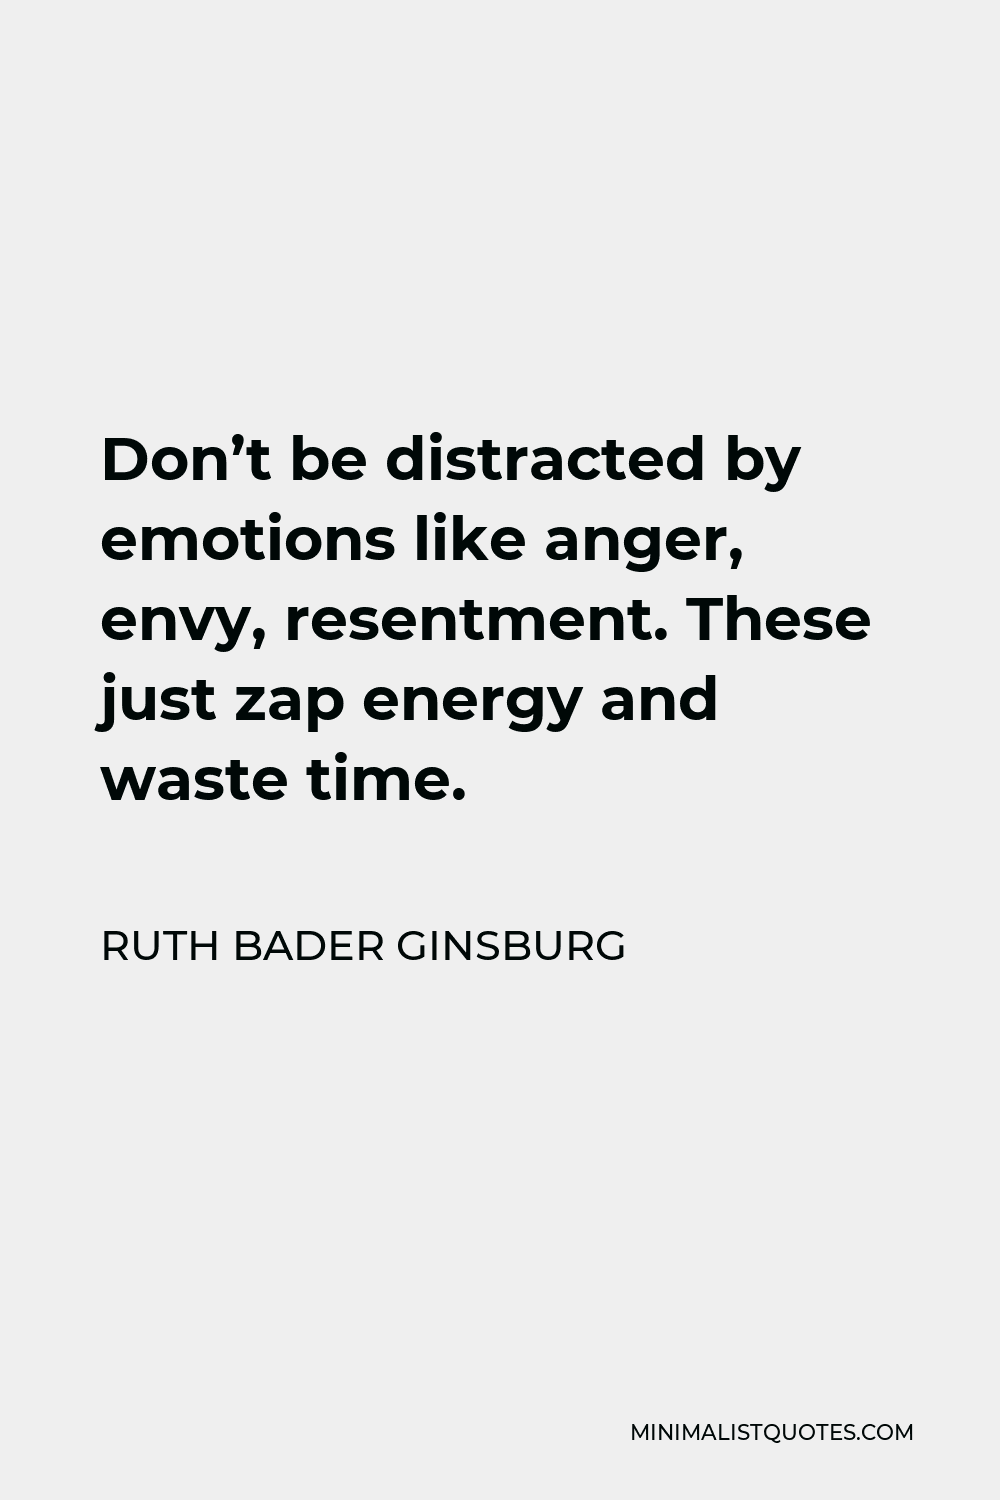 Ruth Bader Ginsburg Quote - Don’t be distracted by emotions like anger, envy, resentment. These just zap energy and waste time.